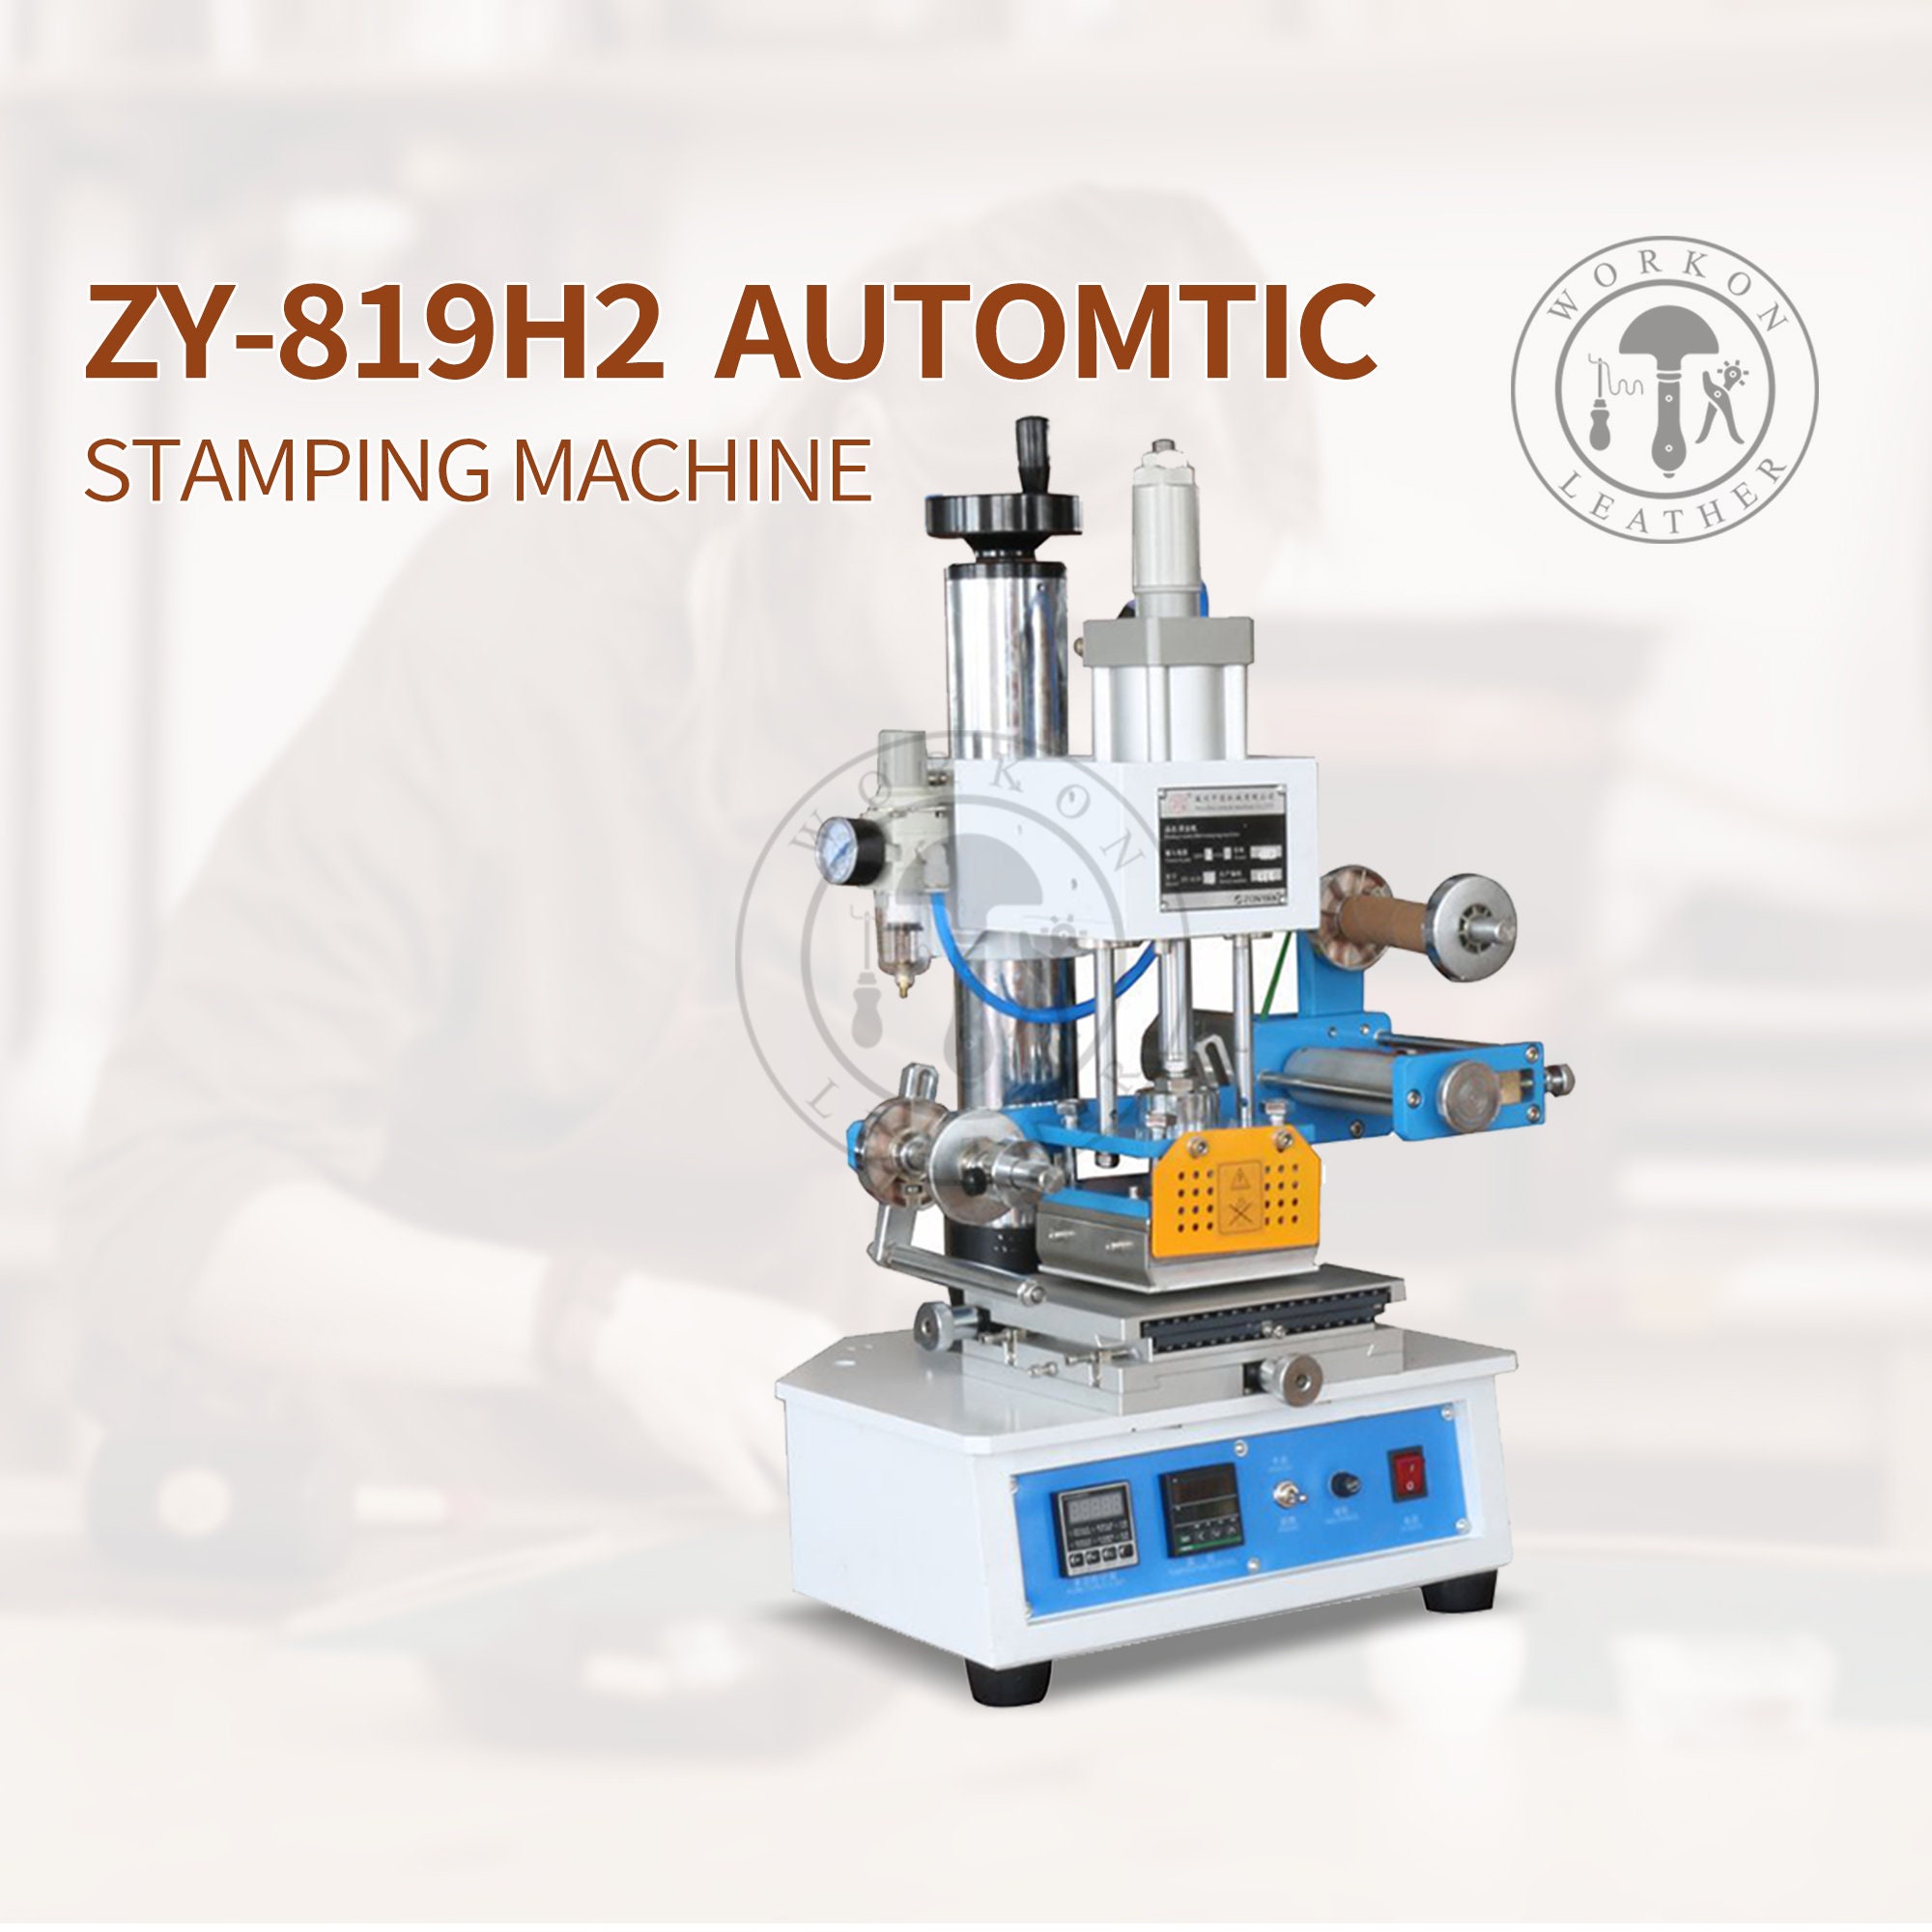 Workonleather Leather 20 Tons Hydraulic Manual Steel Rule Clicker Die  Cutting Pressing Machine for Custom Leather Die Cutter 